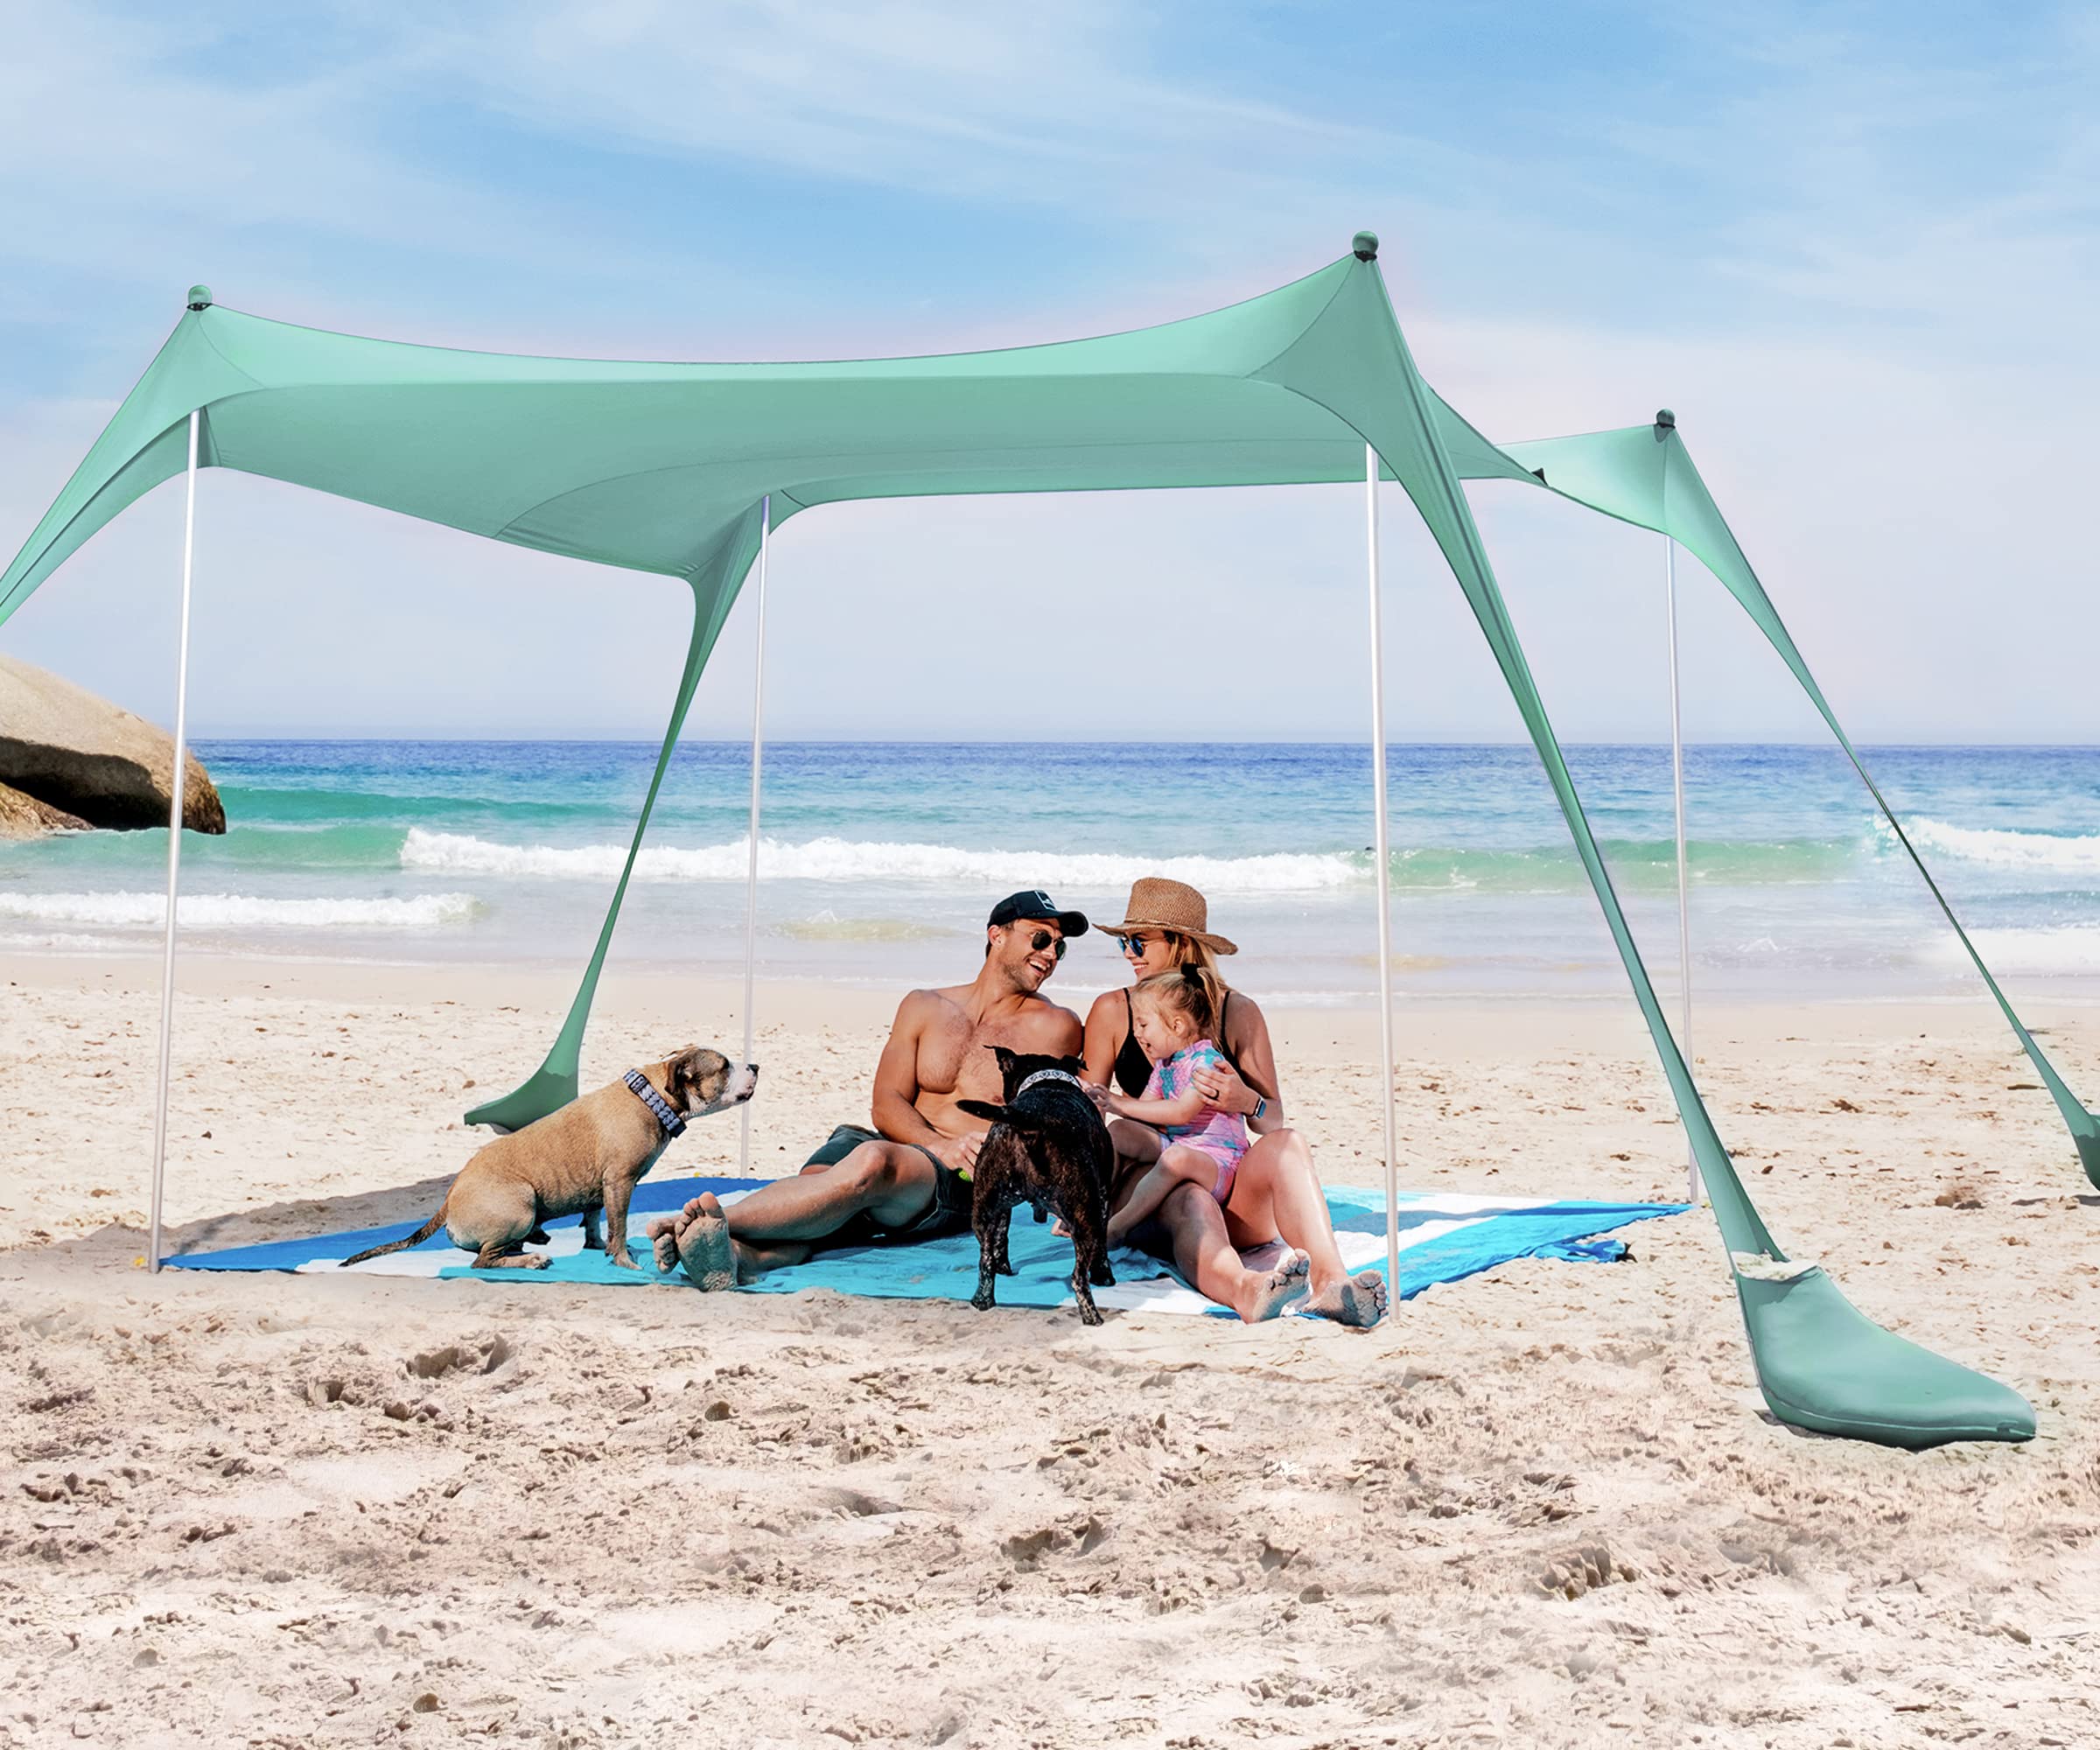 SUN NINJA Beach Tent Sun Shelter with UPF50+ Protection, Includes Sand Shovel, Ground Pegs and Stability Poles, Outdoor Pop Up Beach Shade Canopy for Camping, Fishing, Backyard Fun or Picnics